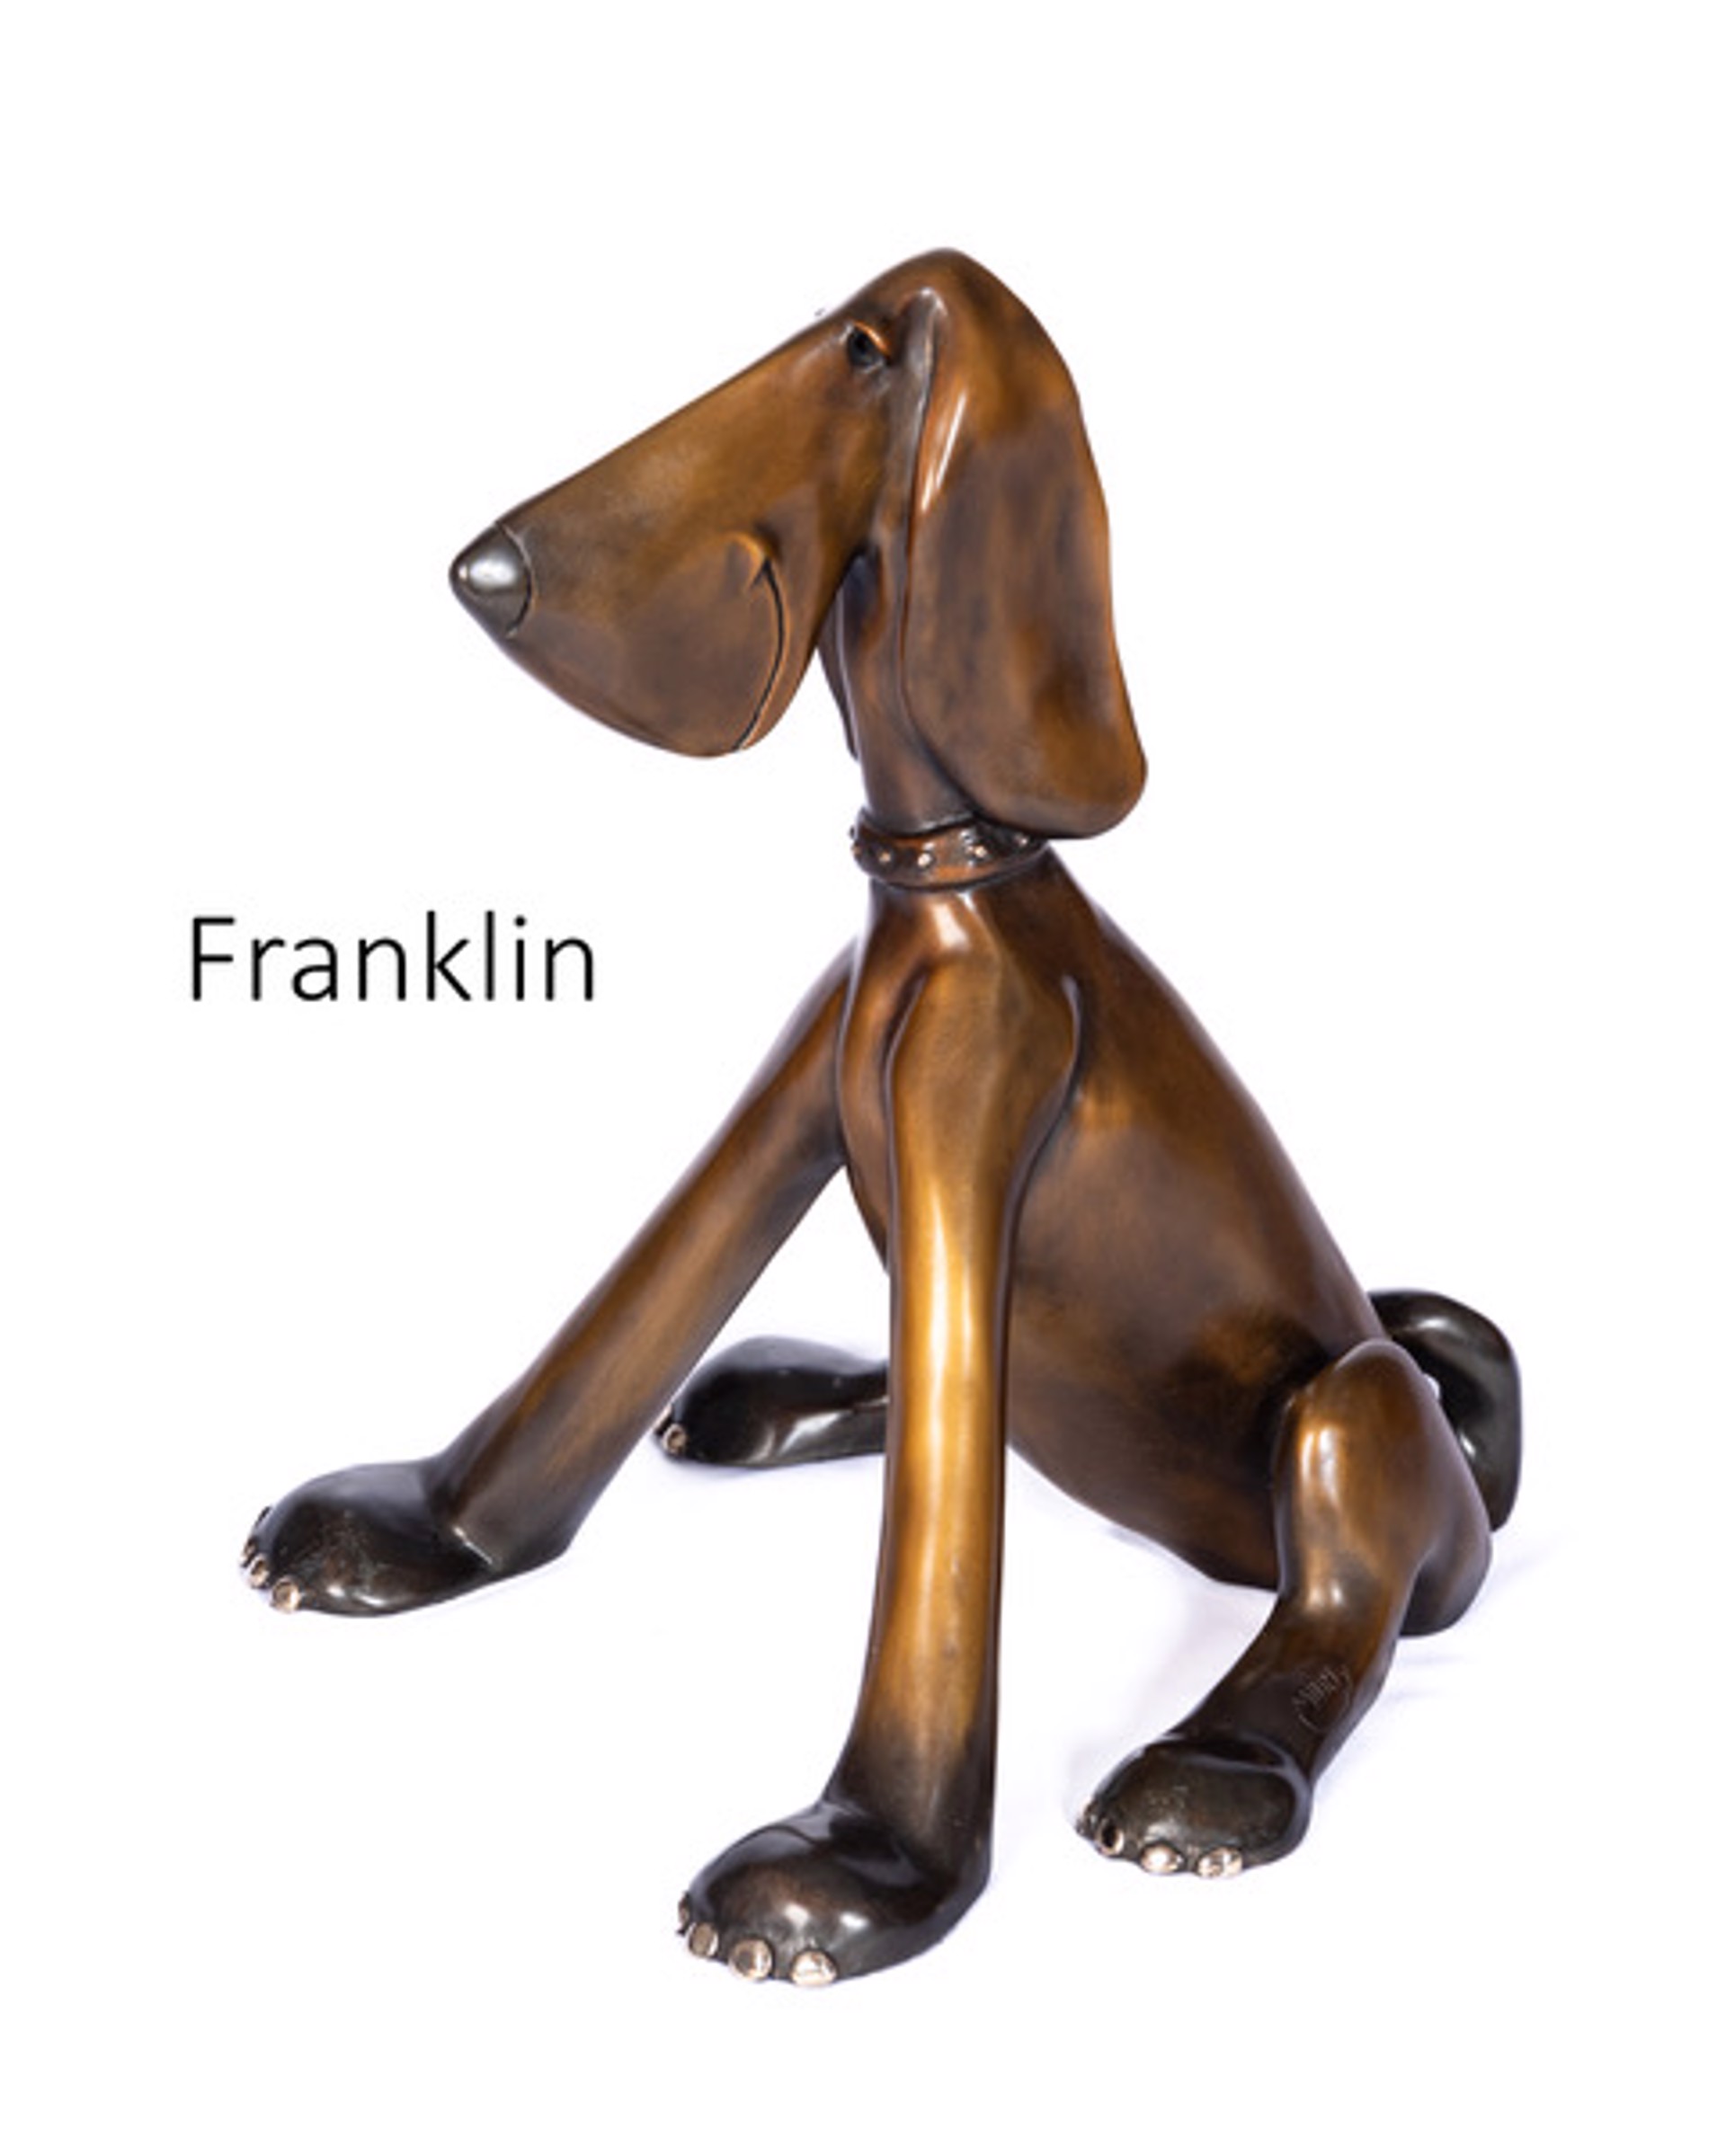 Franklin 2 by Marty Goldstein